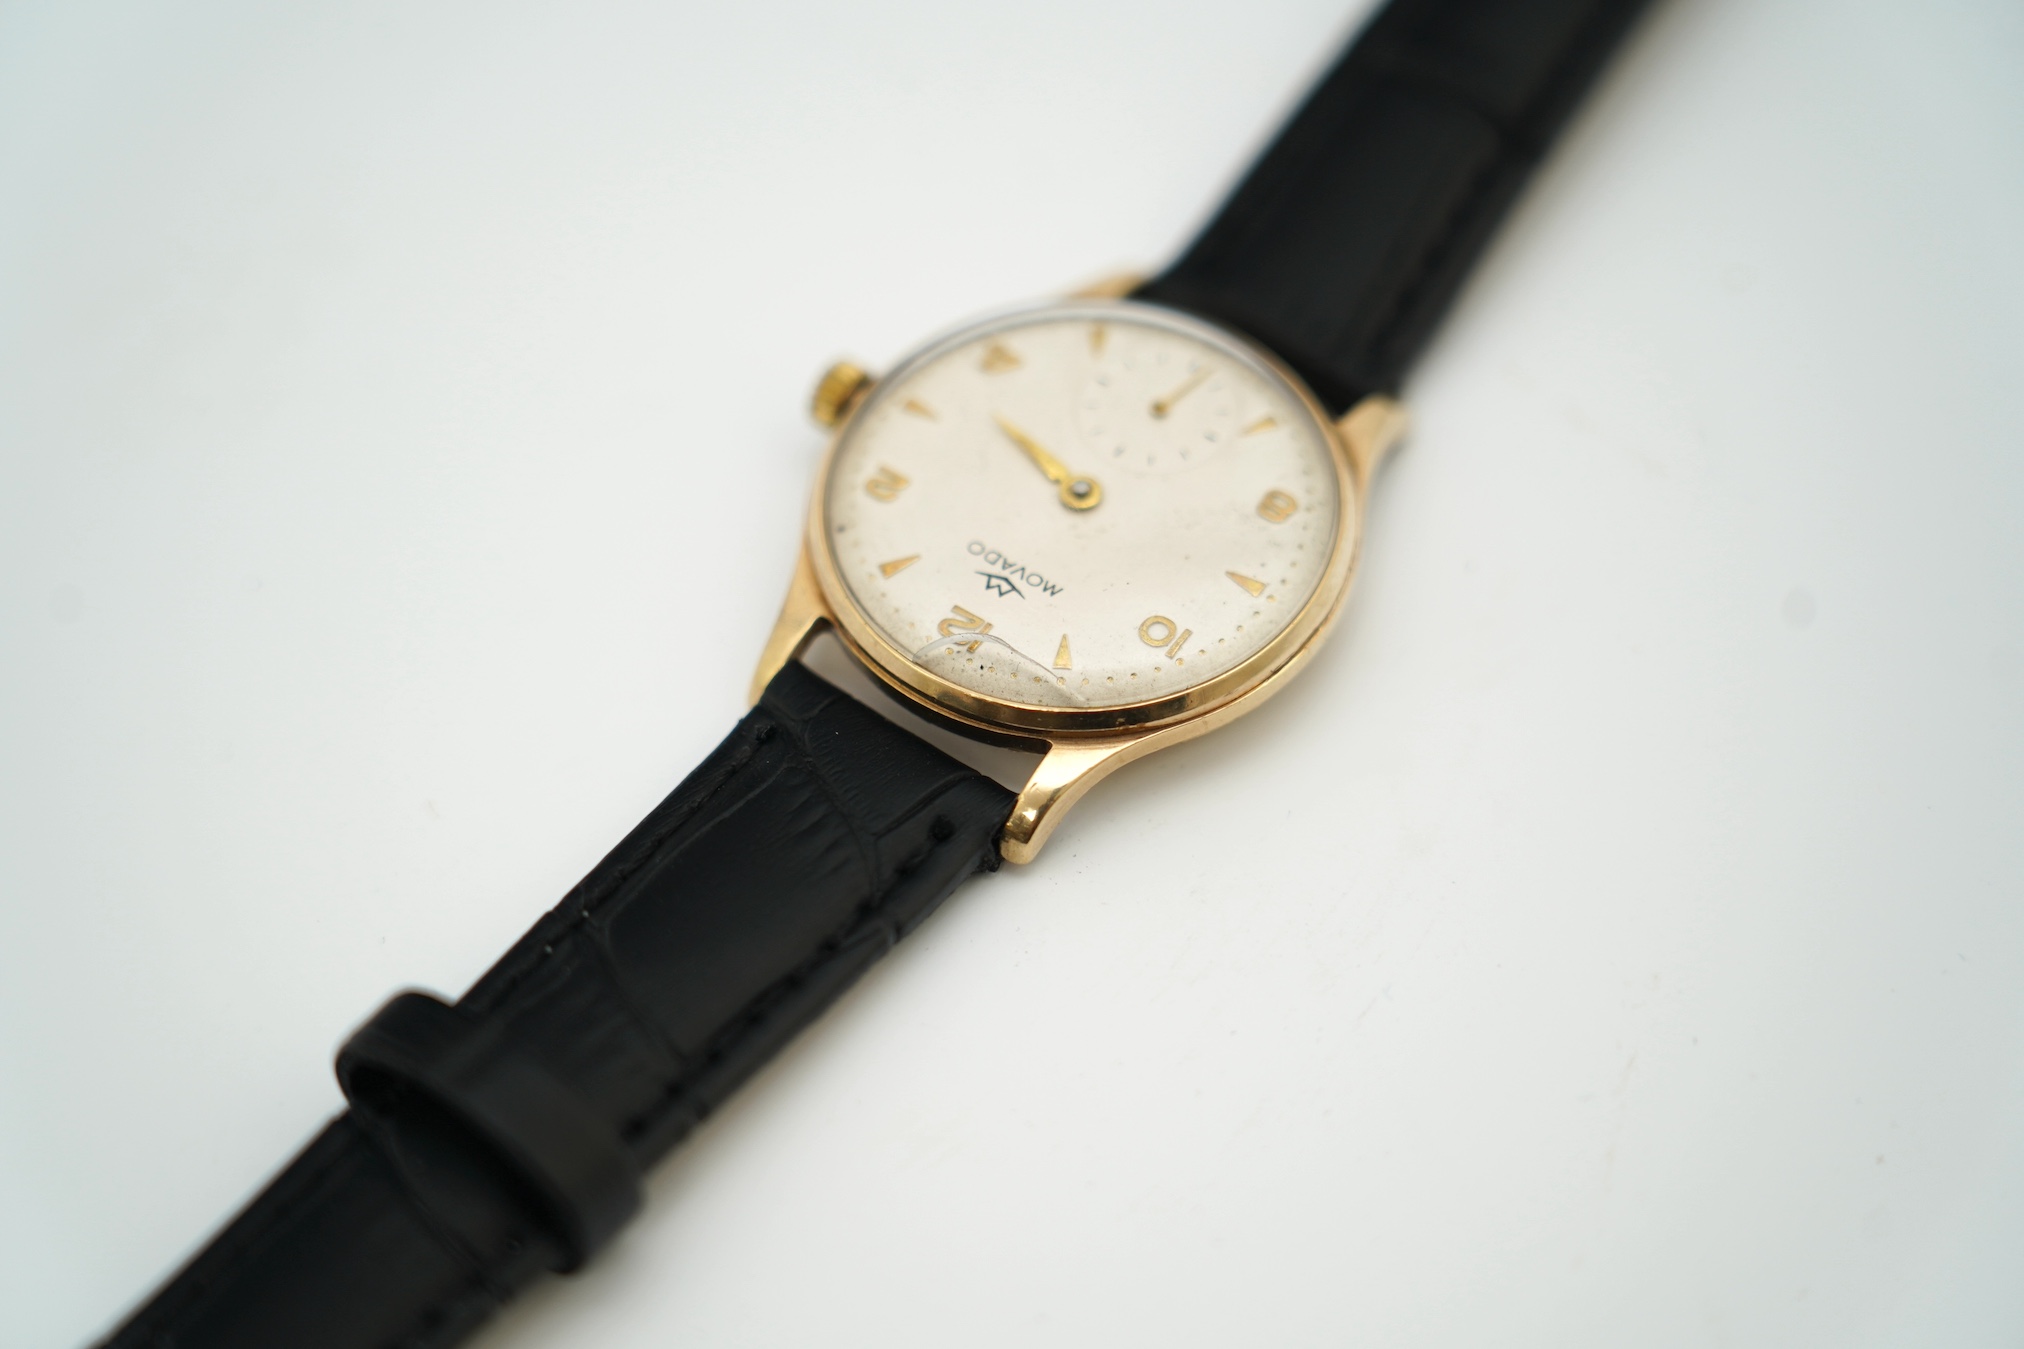 A gentleman's 9ct gold Movado manual wind wrist watch, with baton and Arabic numerals, on associated leather strap, case diameter 32mm. Condition - poor